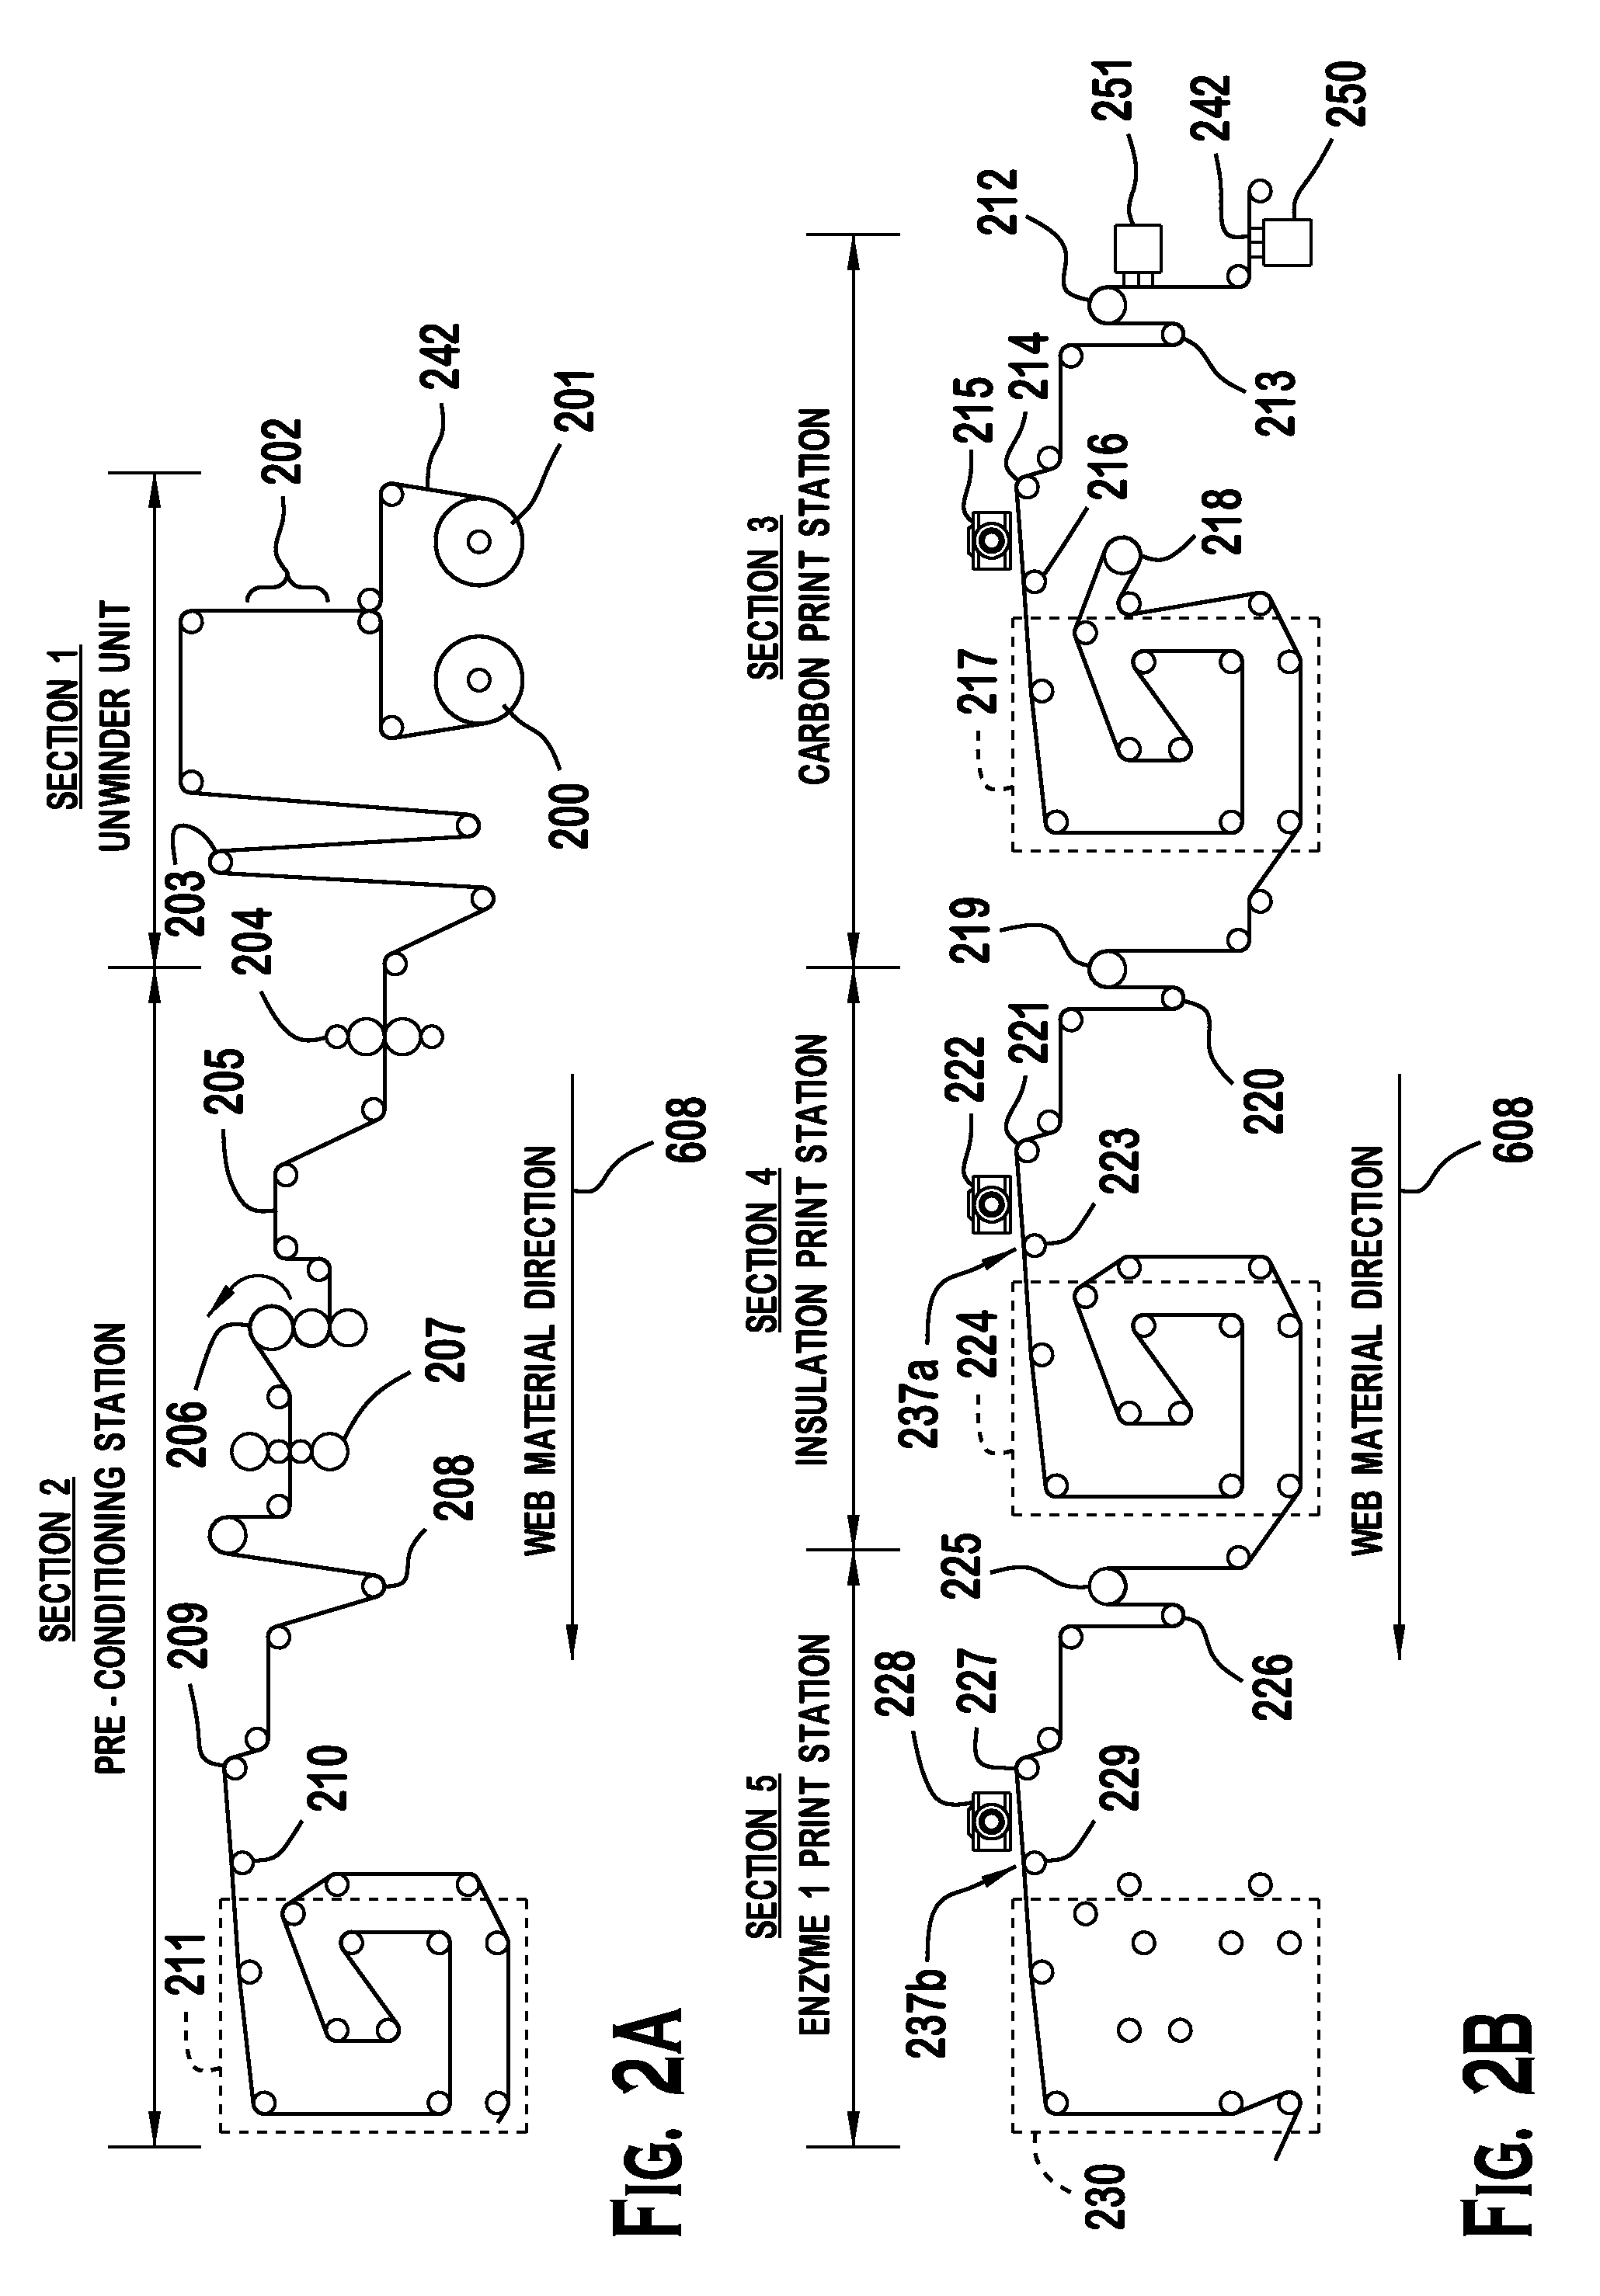 Test strips, methods, and system of manufacturing test strip lots having a predetermined calibration characteristic